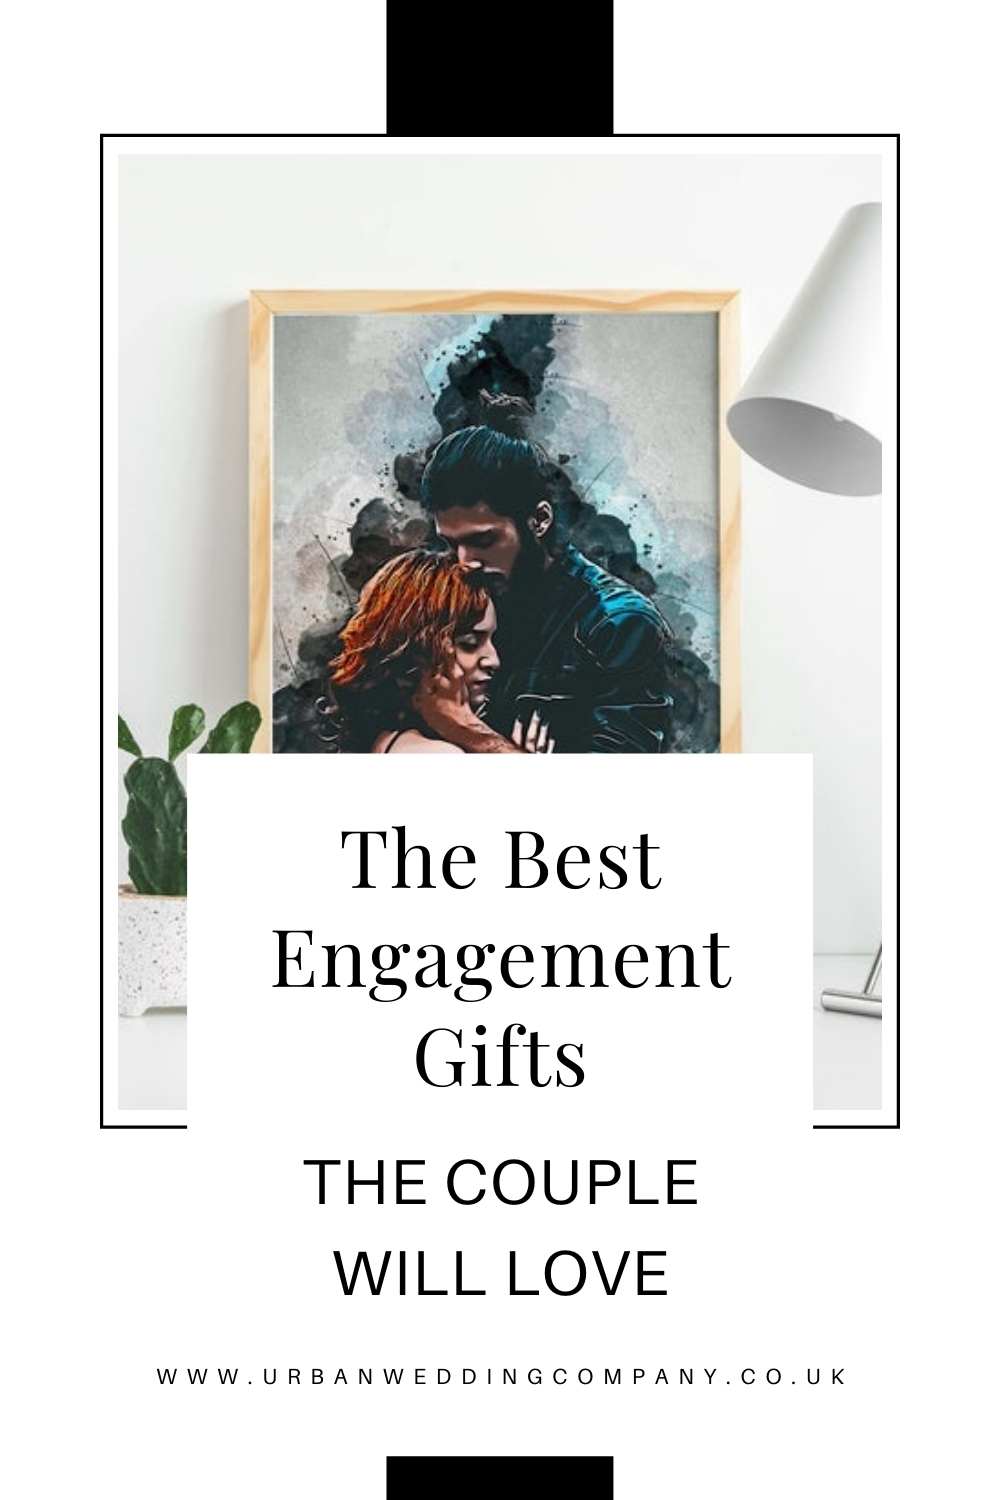 THE BEST ENGAGEMENT GIFT IDEAS